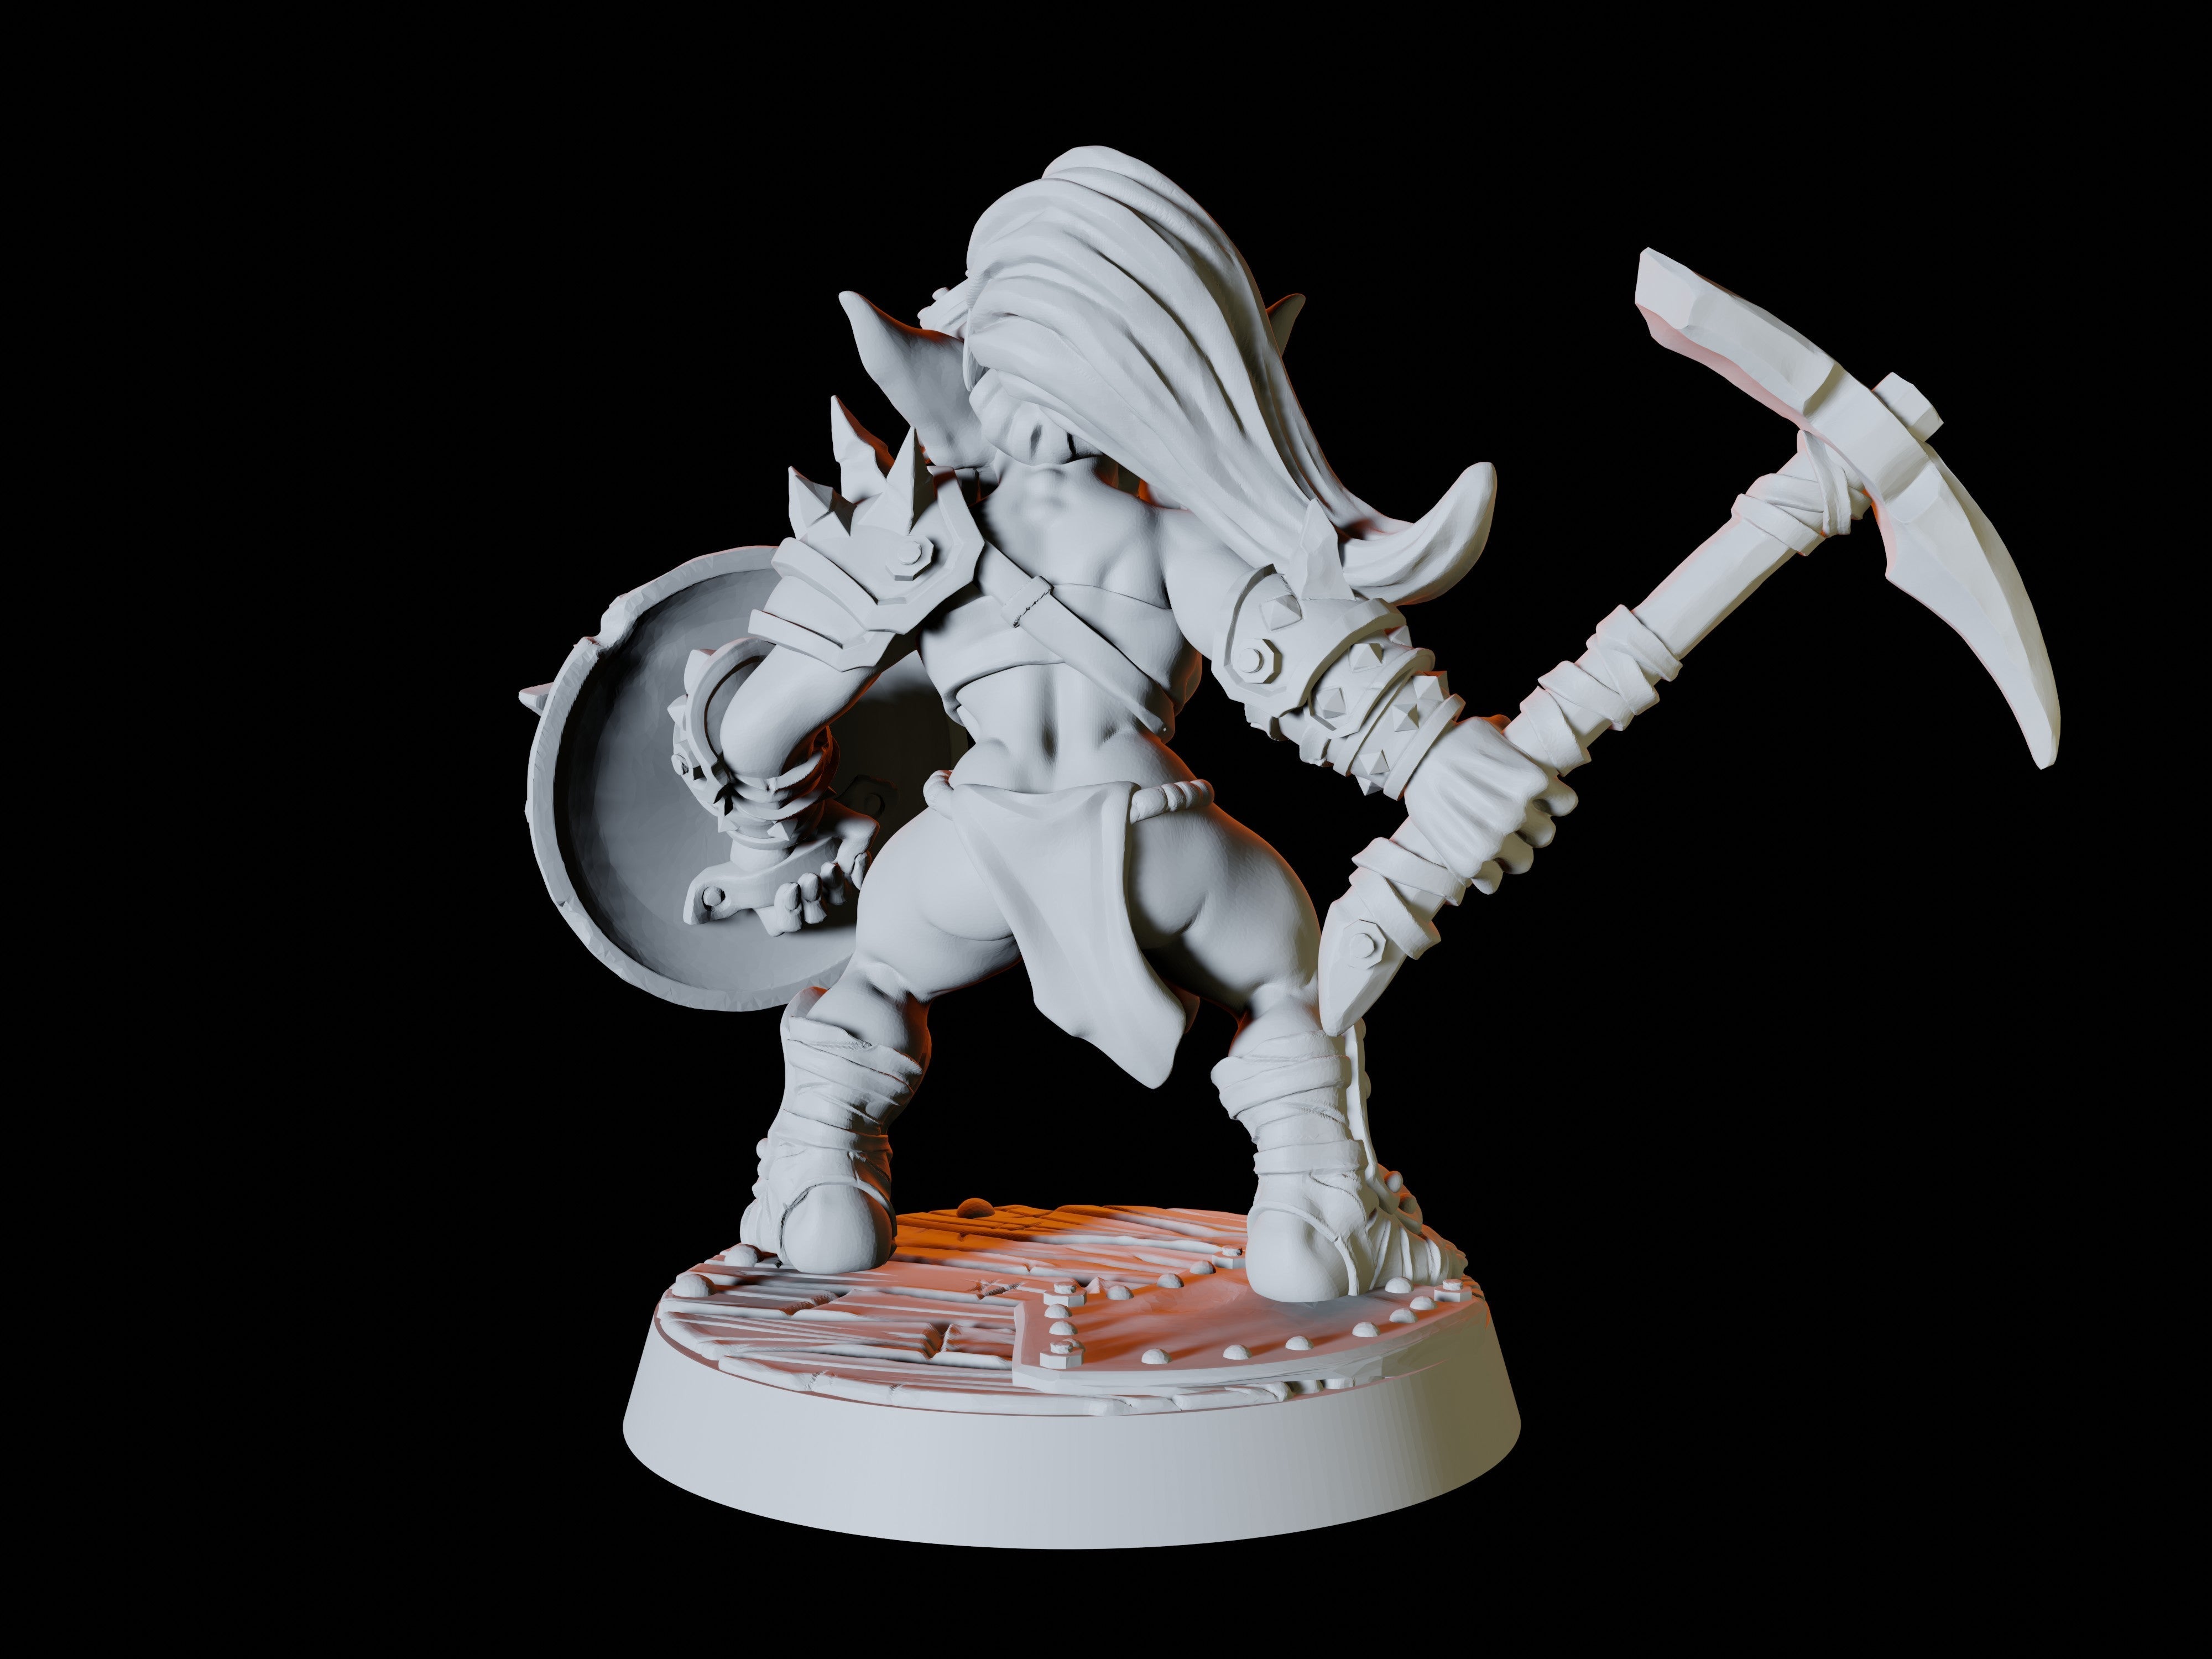 Goblin Army - Six Soldier Miniatures for Dungeons and Dragons